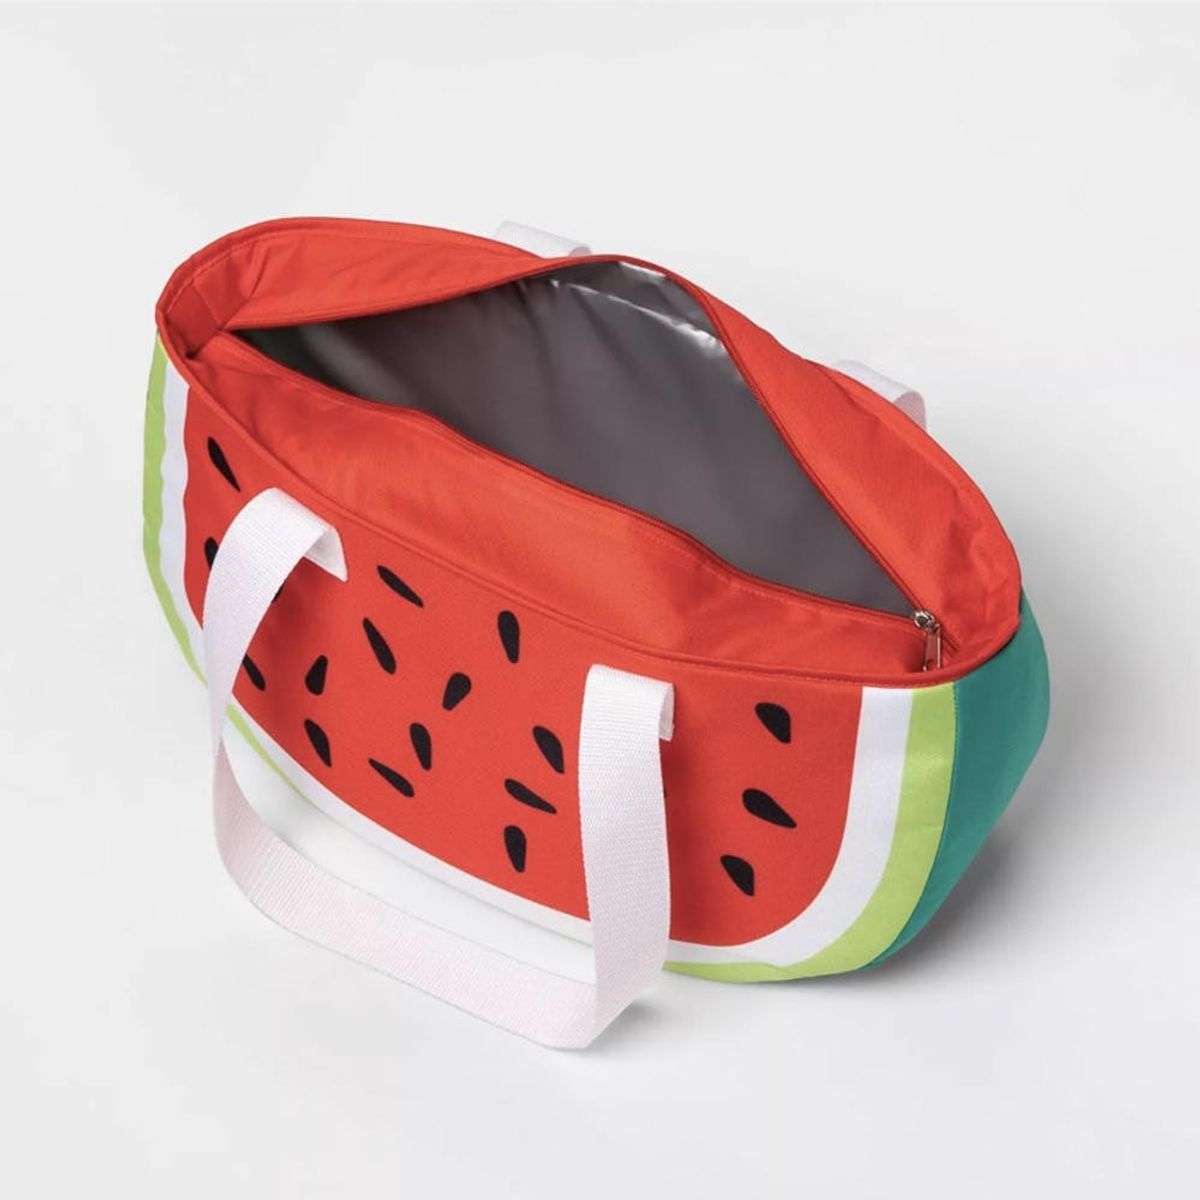 15 Watermelon Gifts That Celebrate Summer’s Favorite Fruit